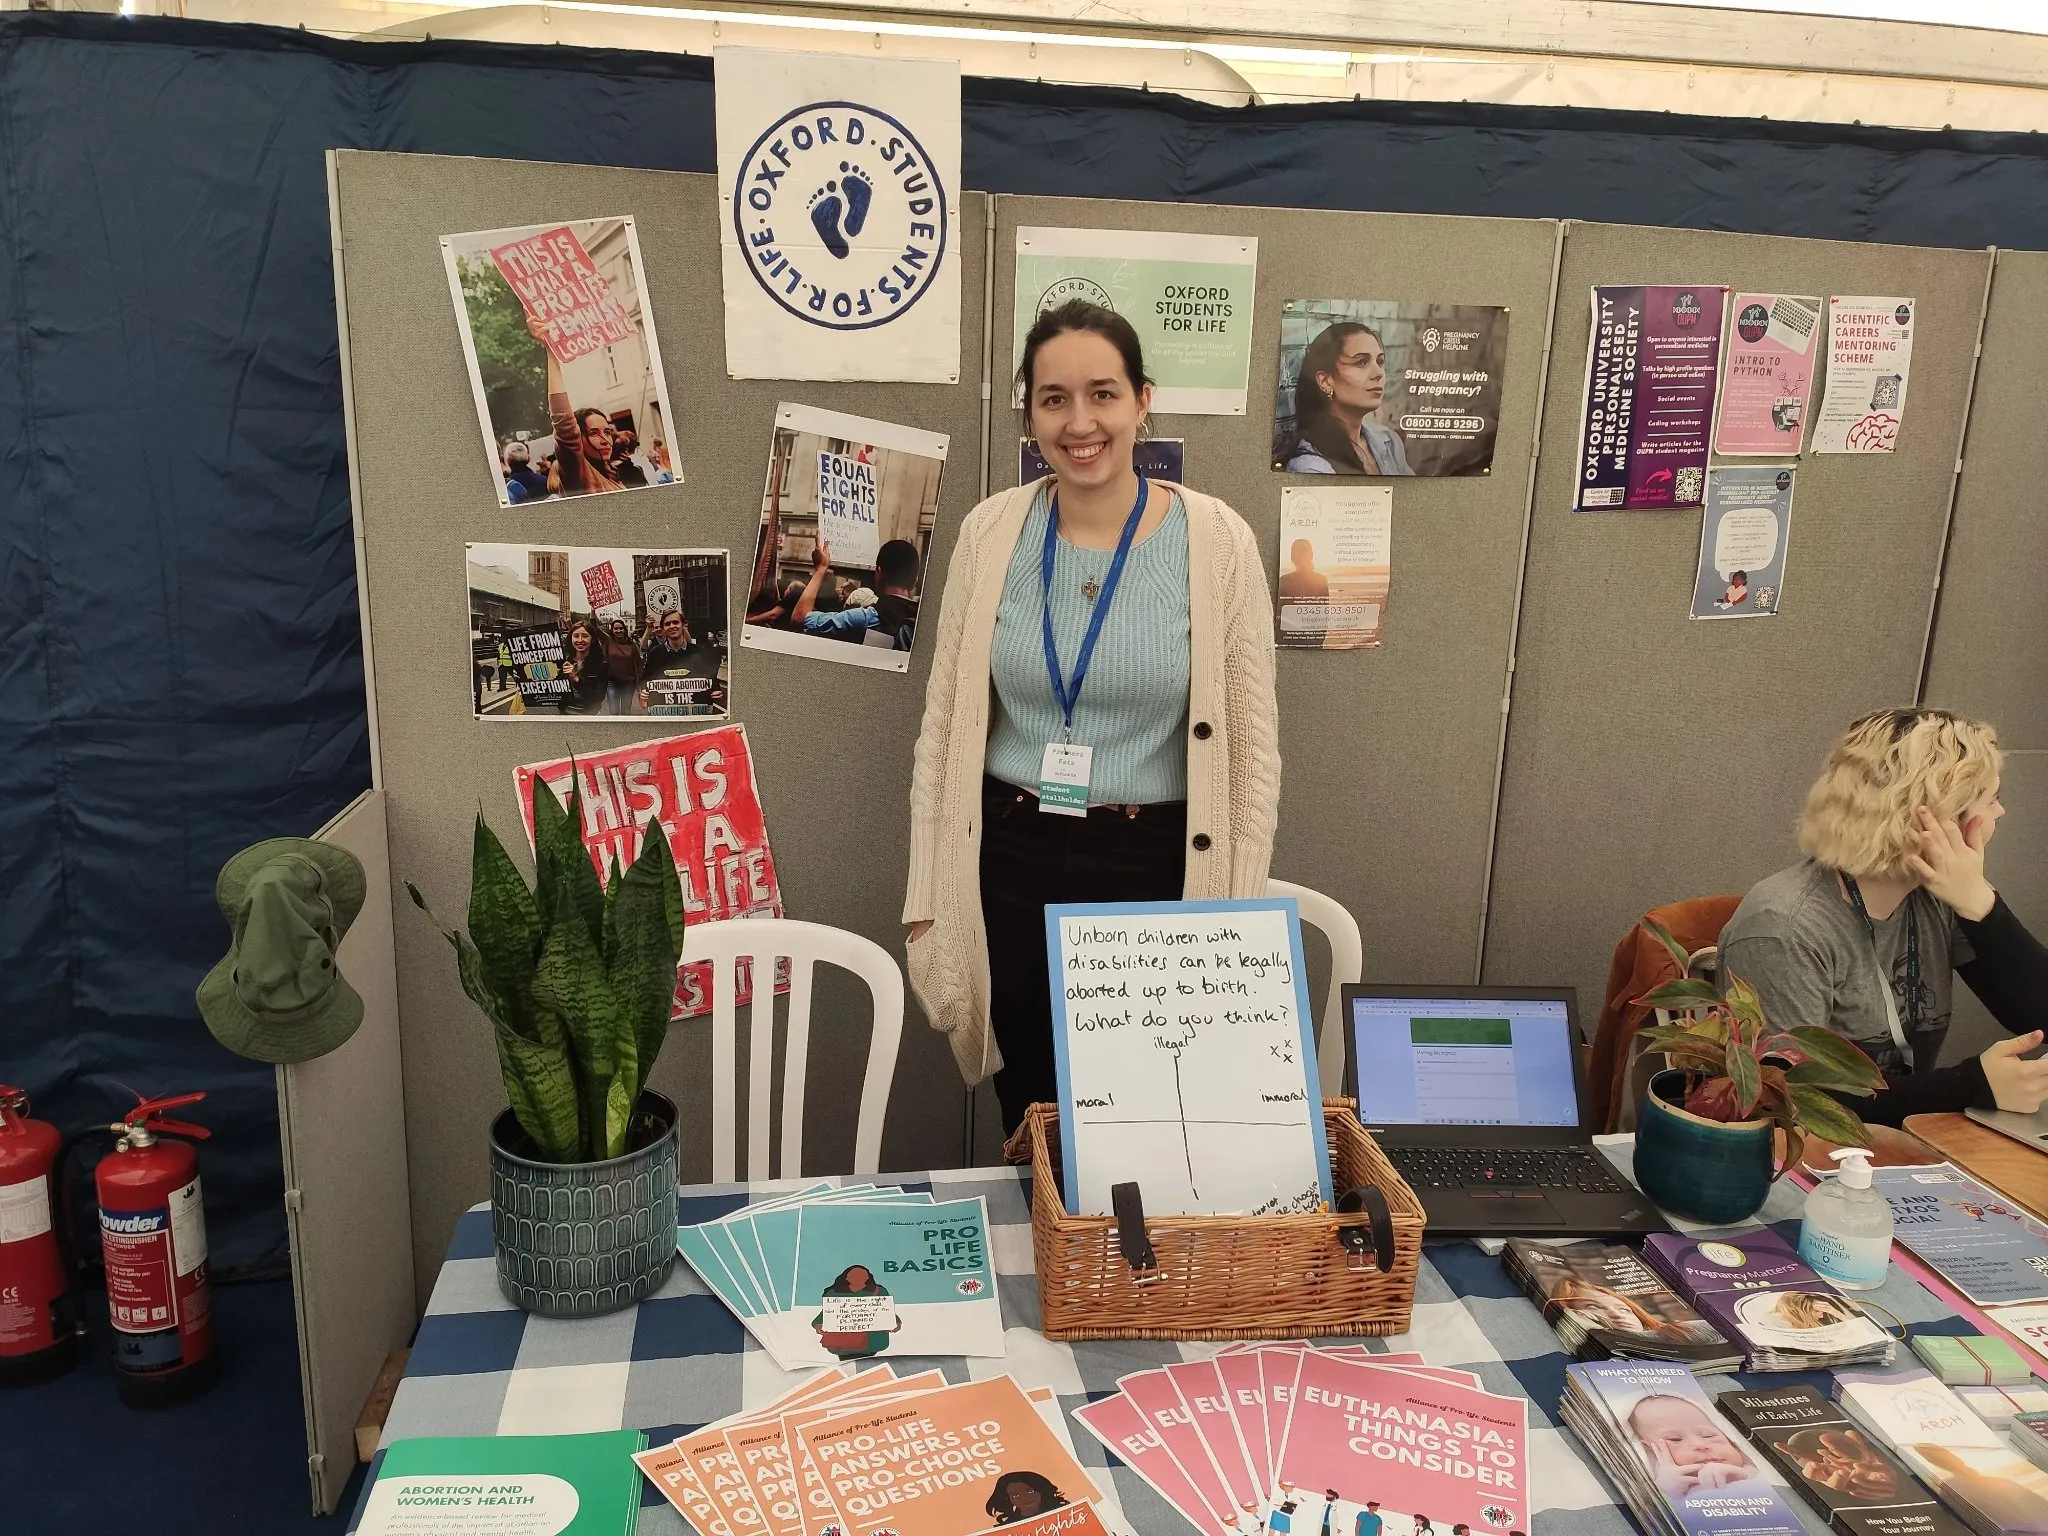 Anna Fleischer, president of Oxford Students for Life, at Oxford University’s Student Union’s Freshers’ Fair, Oct. 6, 2021.?w=200&h=150